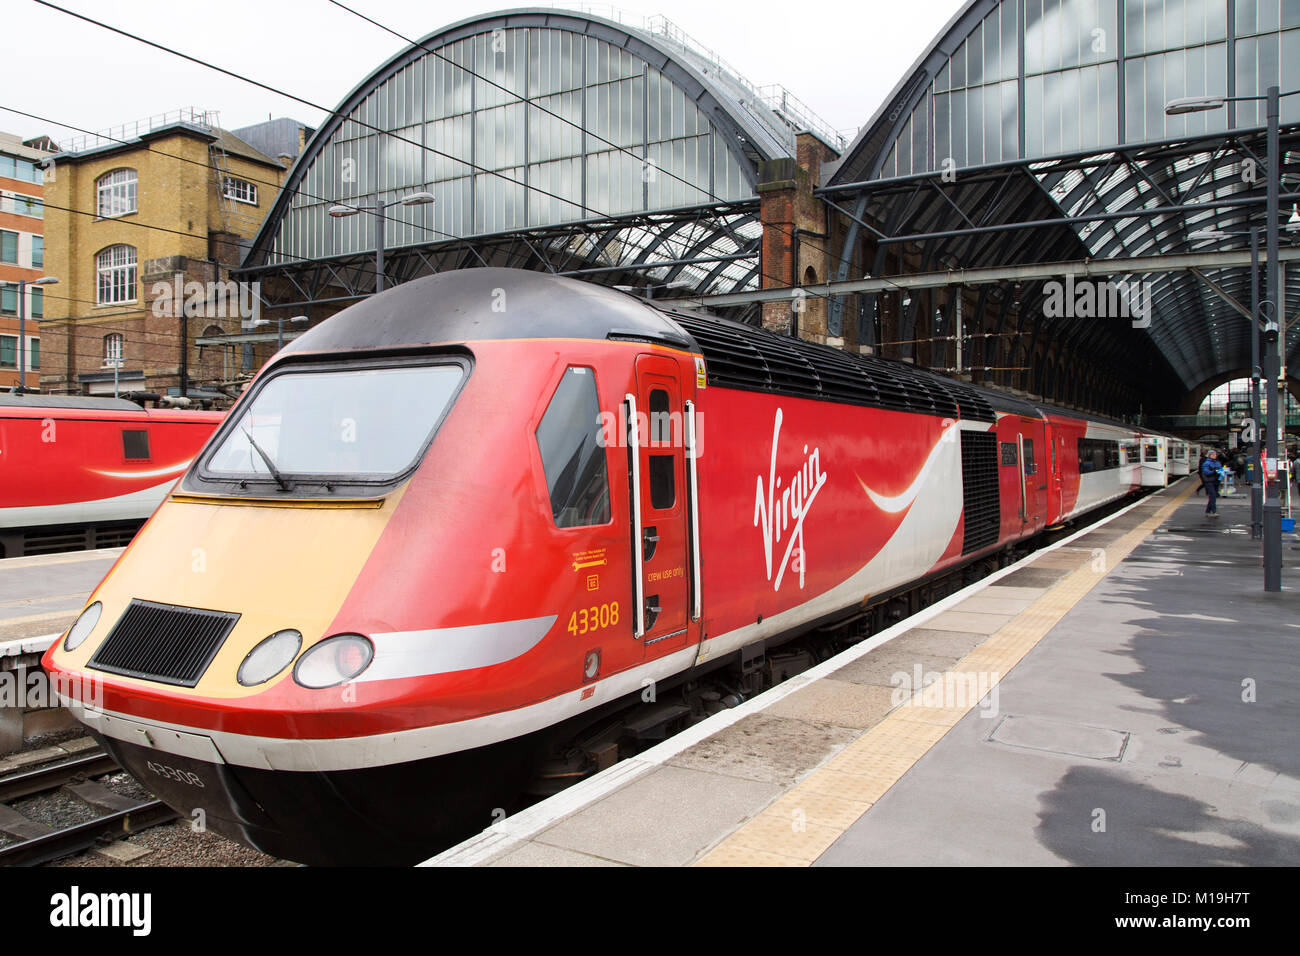 London, UK. 28th Jan, 2018. An engine of one of a Virgin Trains East Coast train at Kings Cross railway station in London, England. The service is operated as a joint venture between Stagecoach and Virgin. Credit: Stuart Forster/Alamy Live News Stock Photo